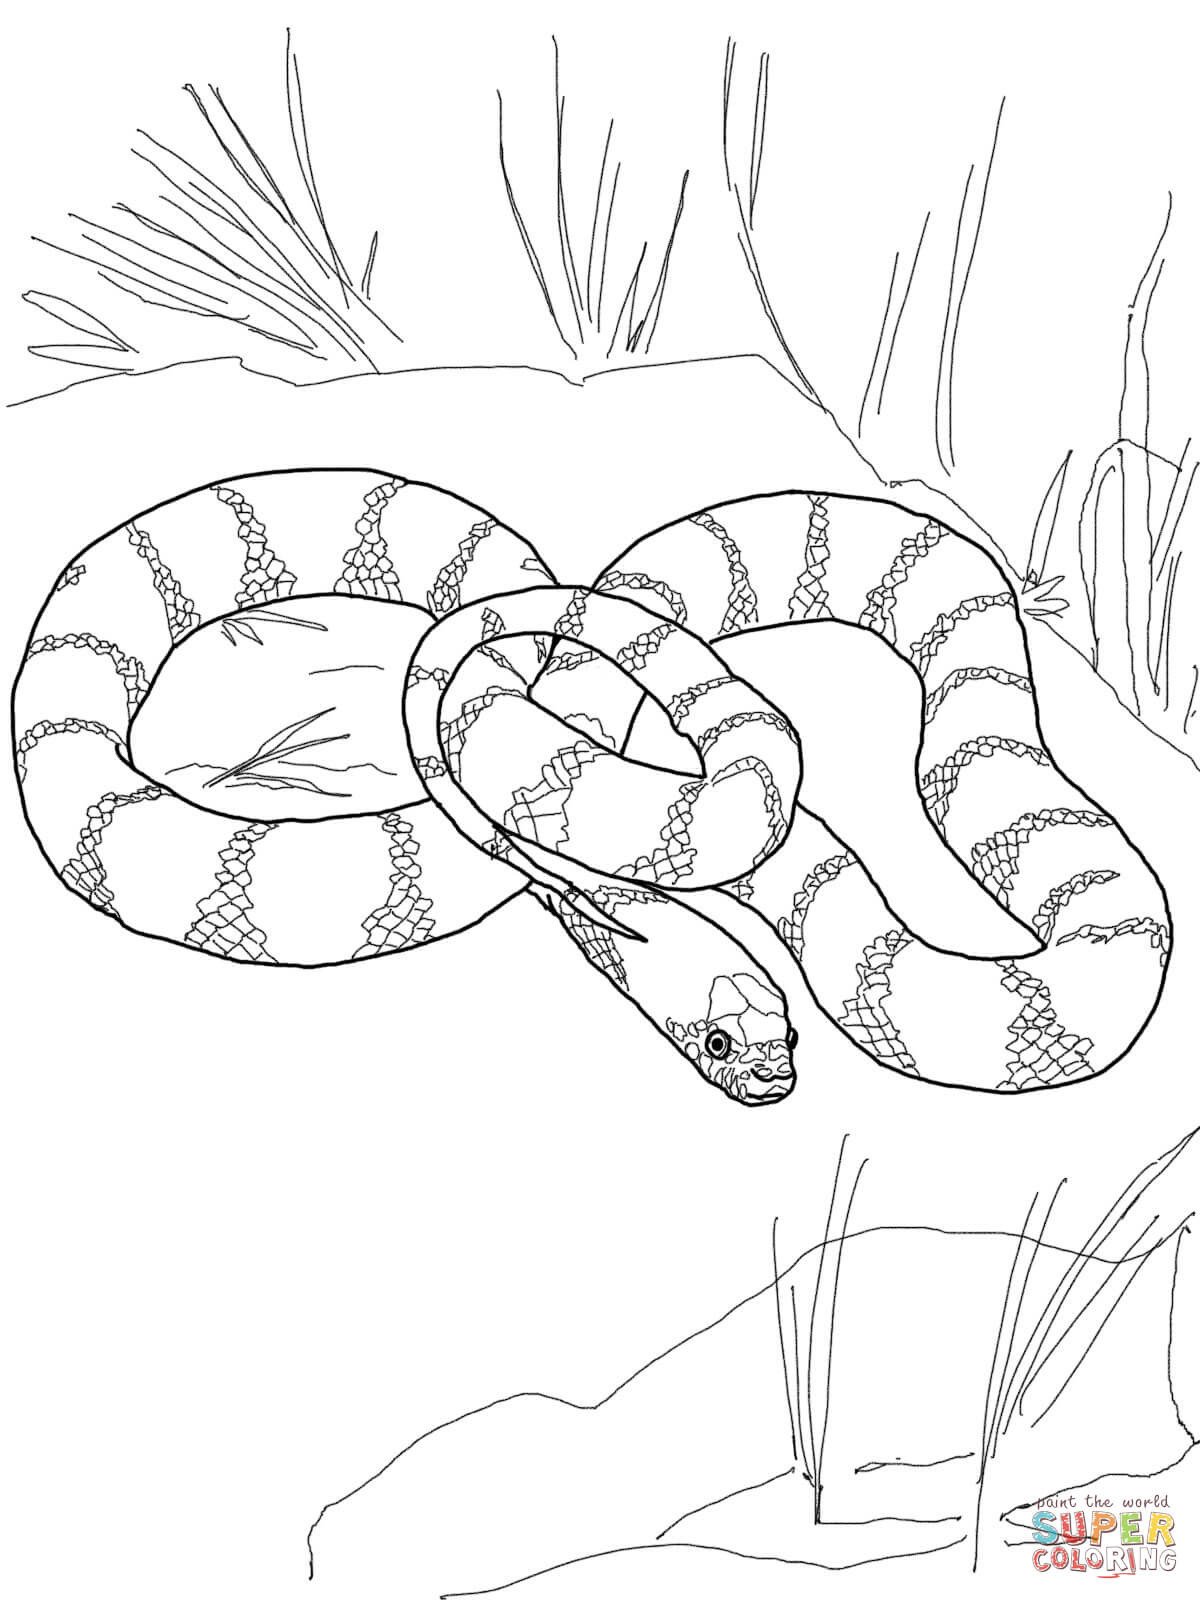 Snake Coloring Pages Printable
 California King Snake coloring page